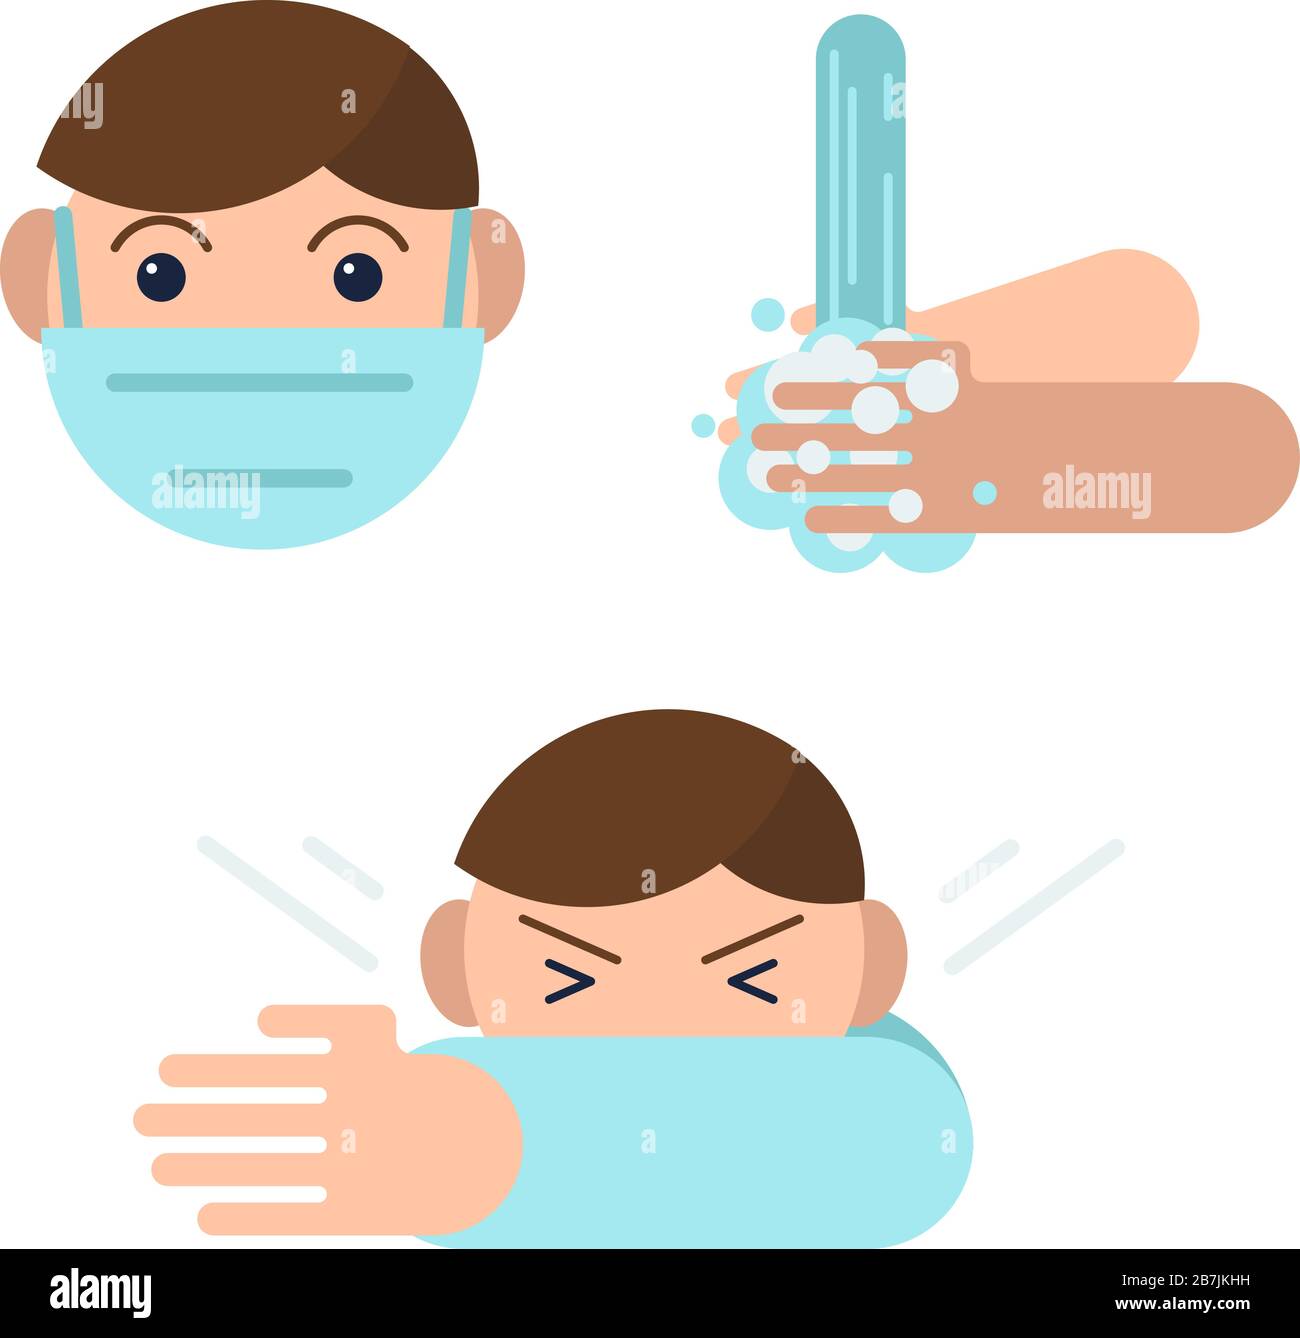 Coronavirus Precaution Tips. 2019-nCoV, Covid-19. Abstract infographic symptoms and prevention tips, health and medical. Flat outline icons of man wit Stock Vector